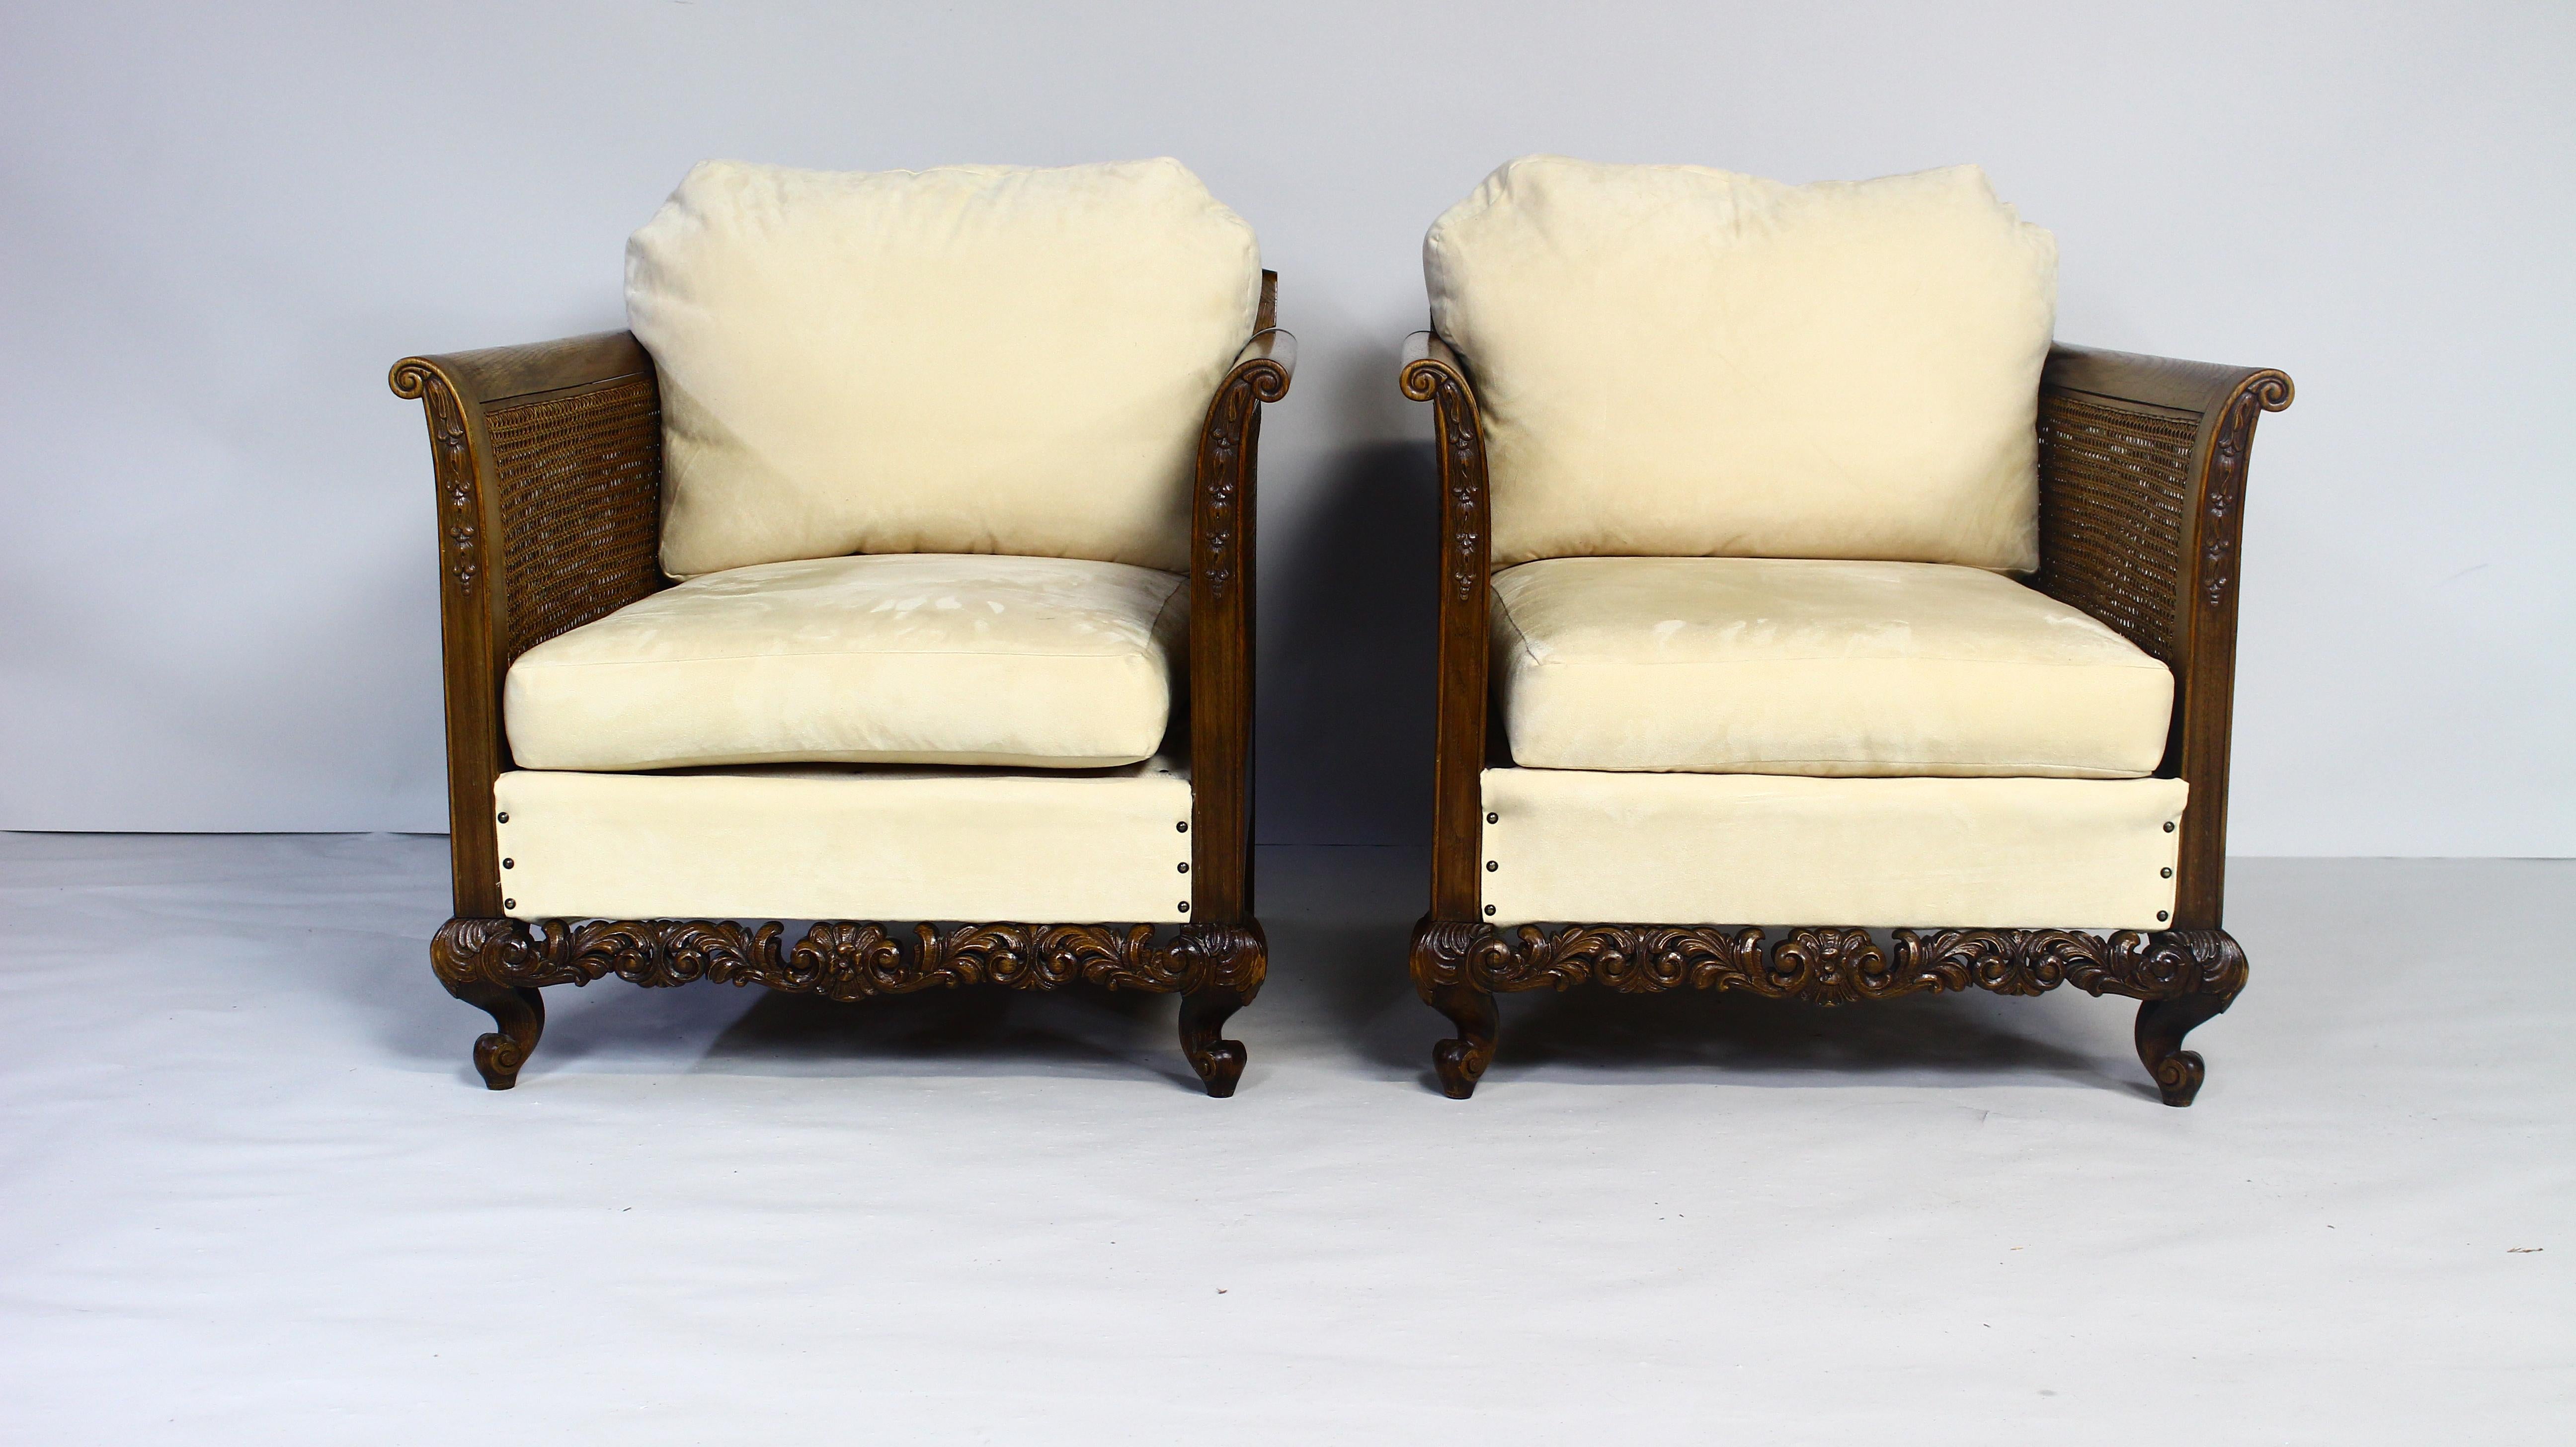 This very decorative early 1900's pair of rattan lounge chairs is beautifully shaped with generous proportions.
Richly decorated, sides and back made of rattan in very good condition.
Modified seat, contemporary cushions.
Very comfortable seats